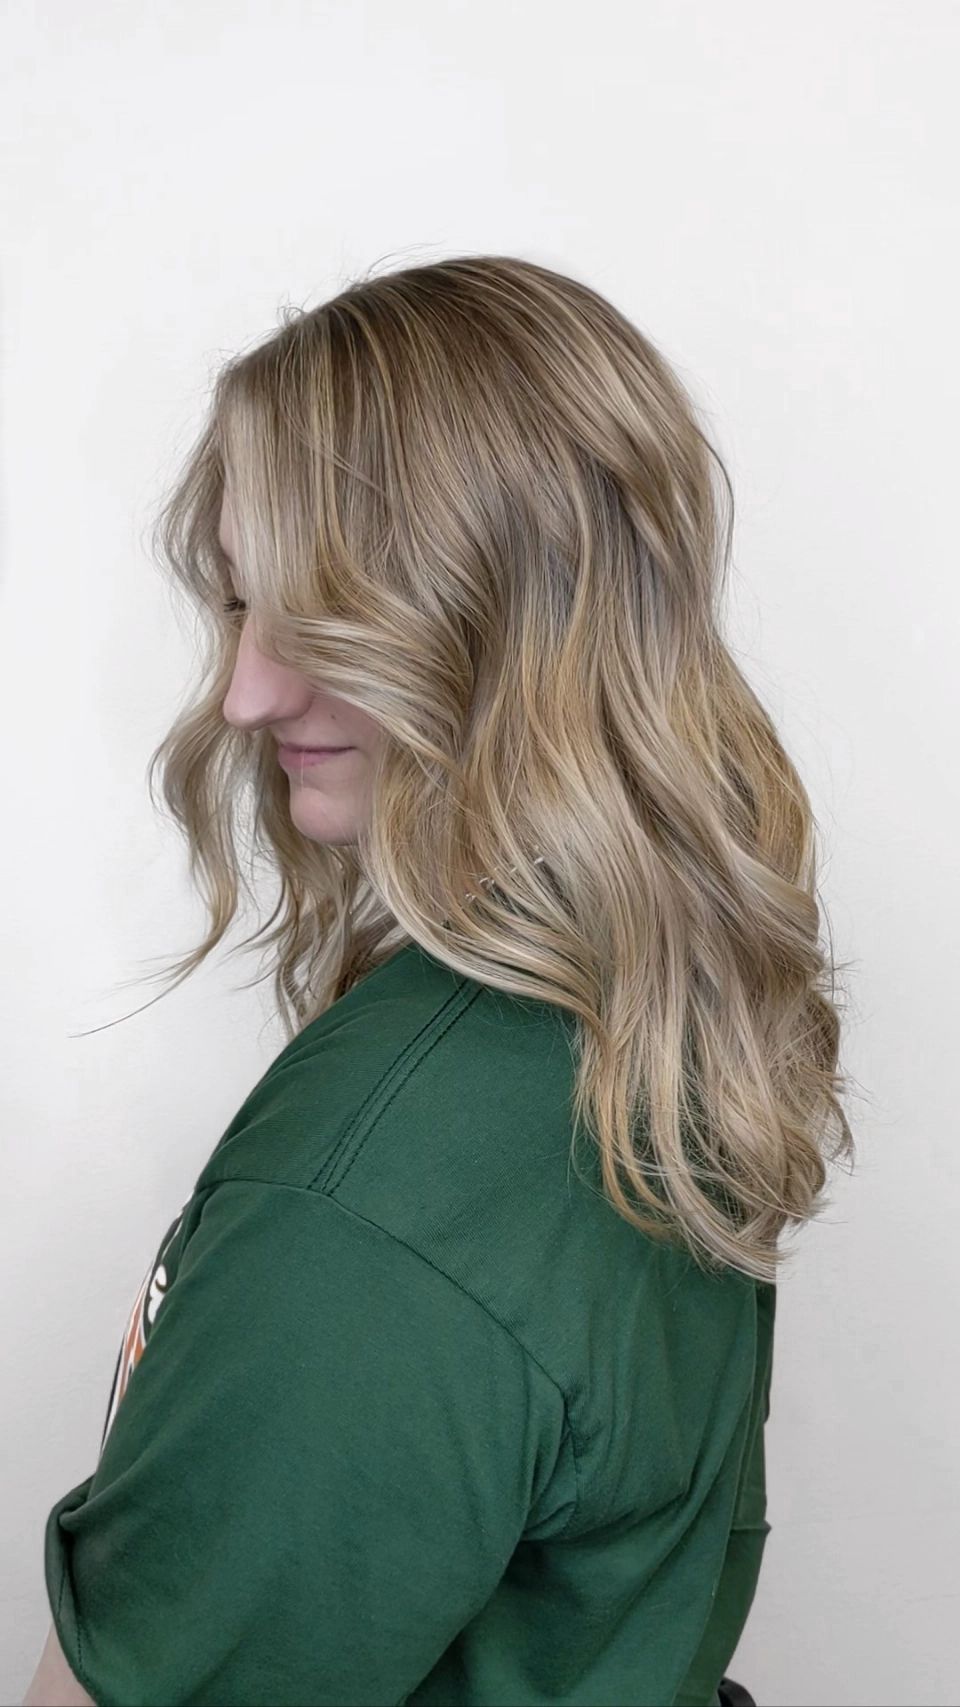 Woman showing her dirty blonde balayage highlights